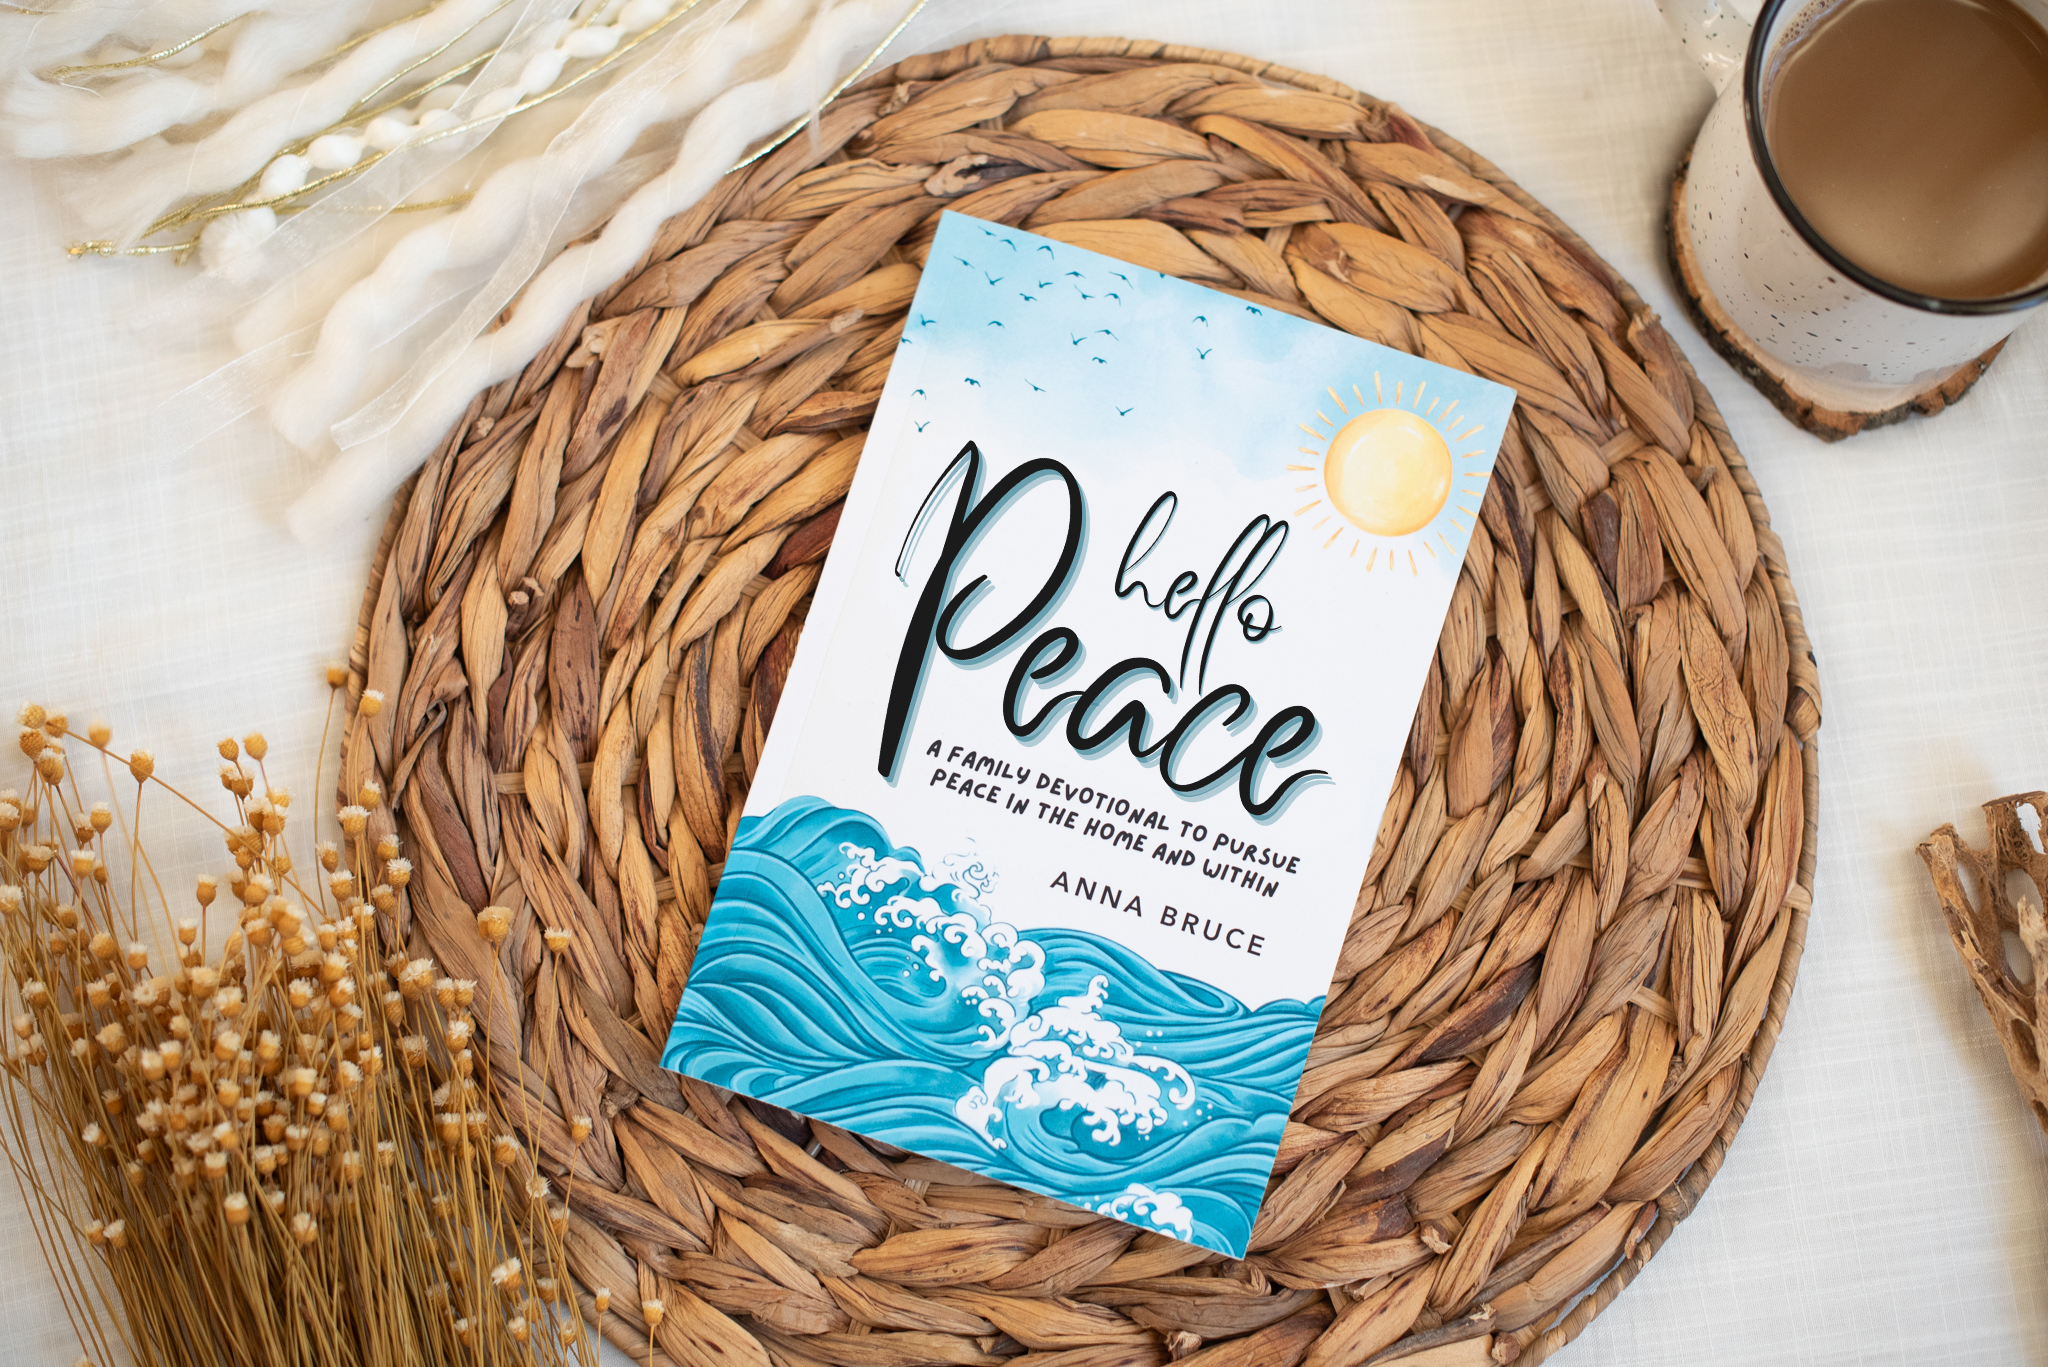 “Hello Peace: A Family Devotional to Pursue Peace in the Home and Within” is COMING!